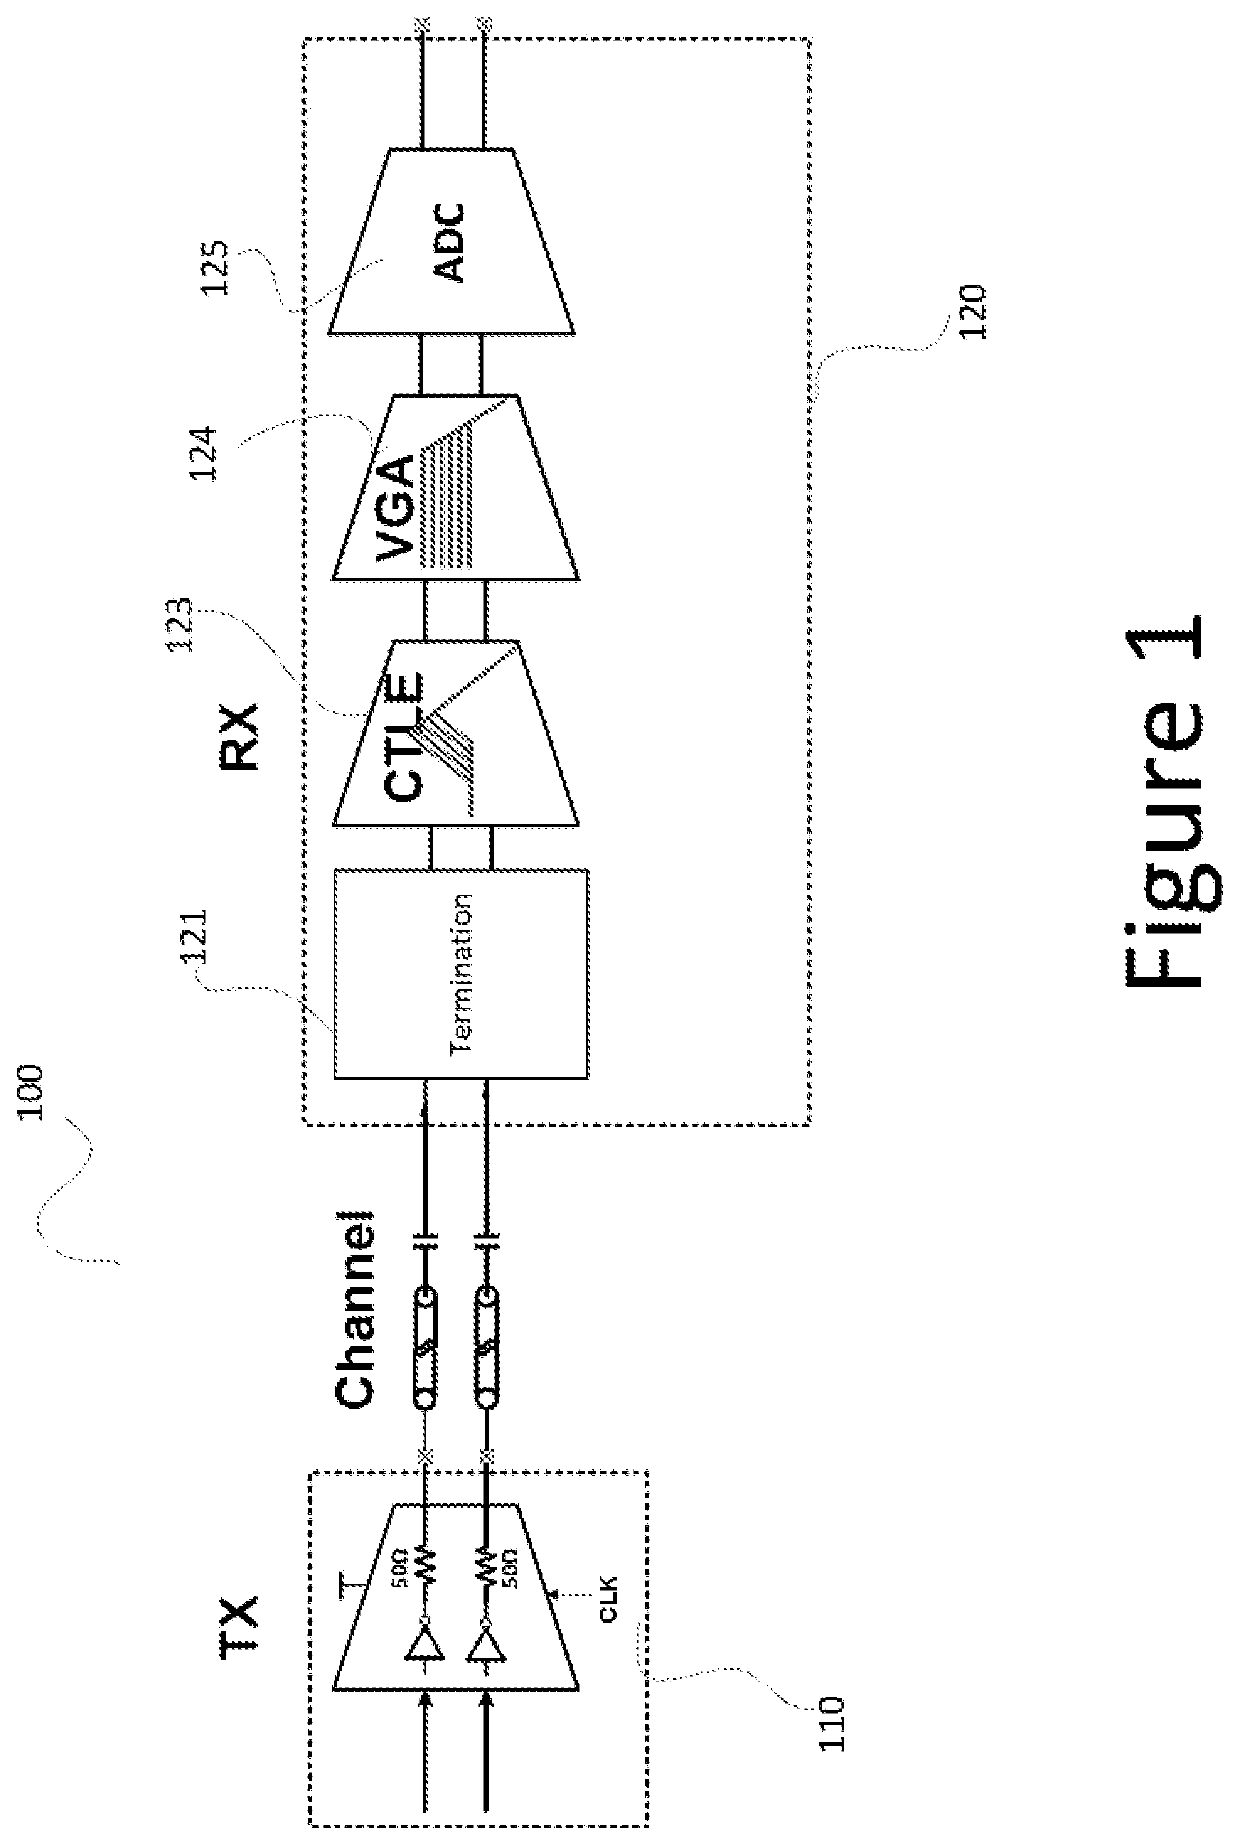 Techniques for programmable gain attenuation in wideband matching networks with enhanced bandwidth